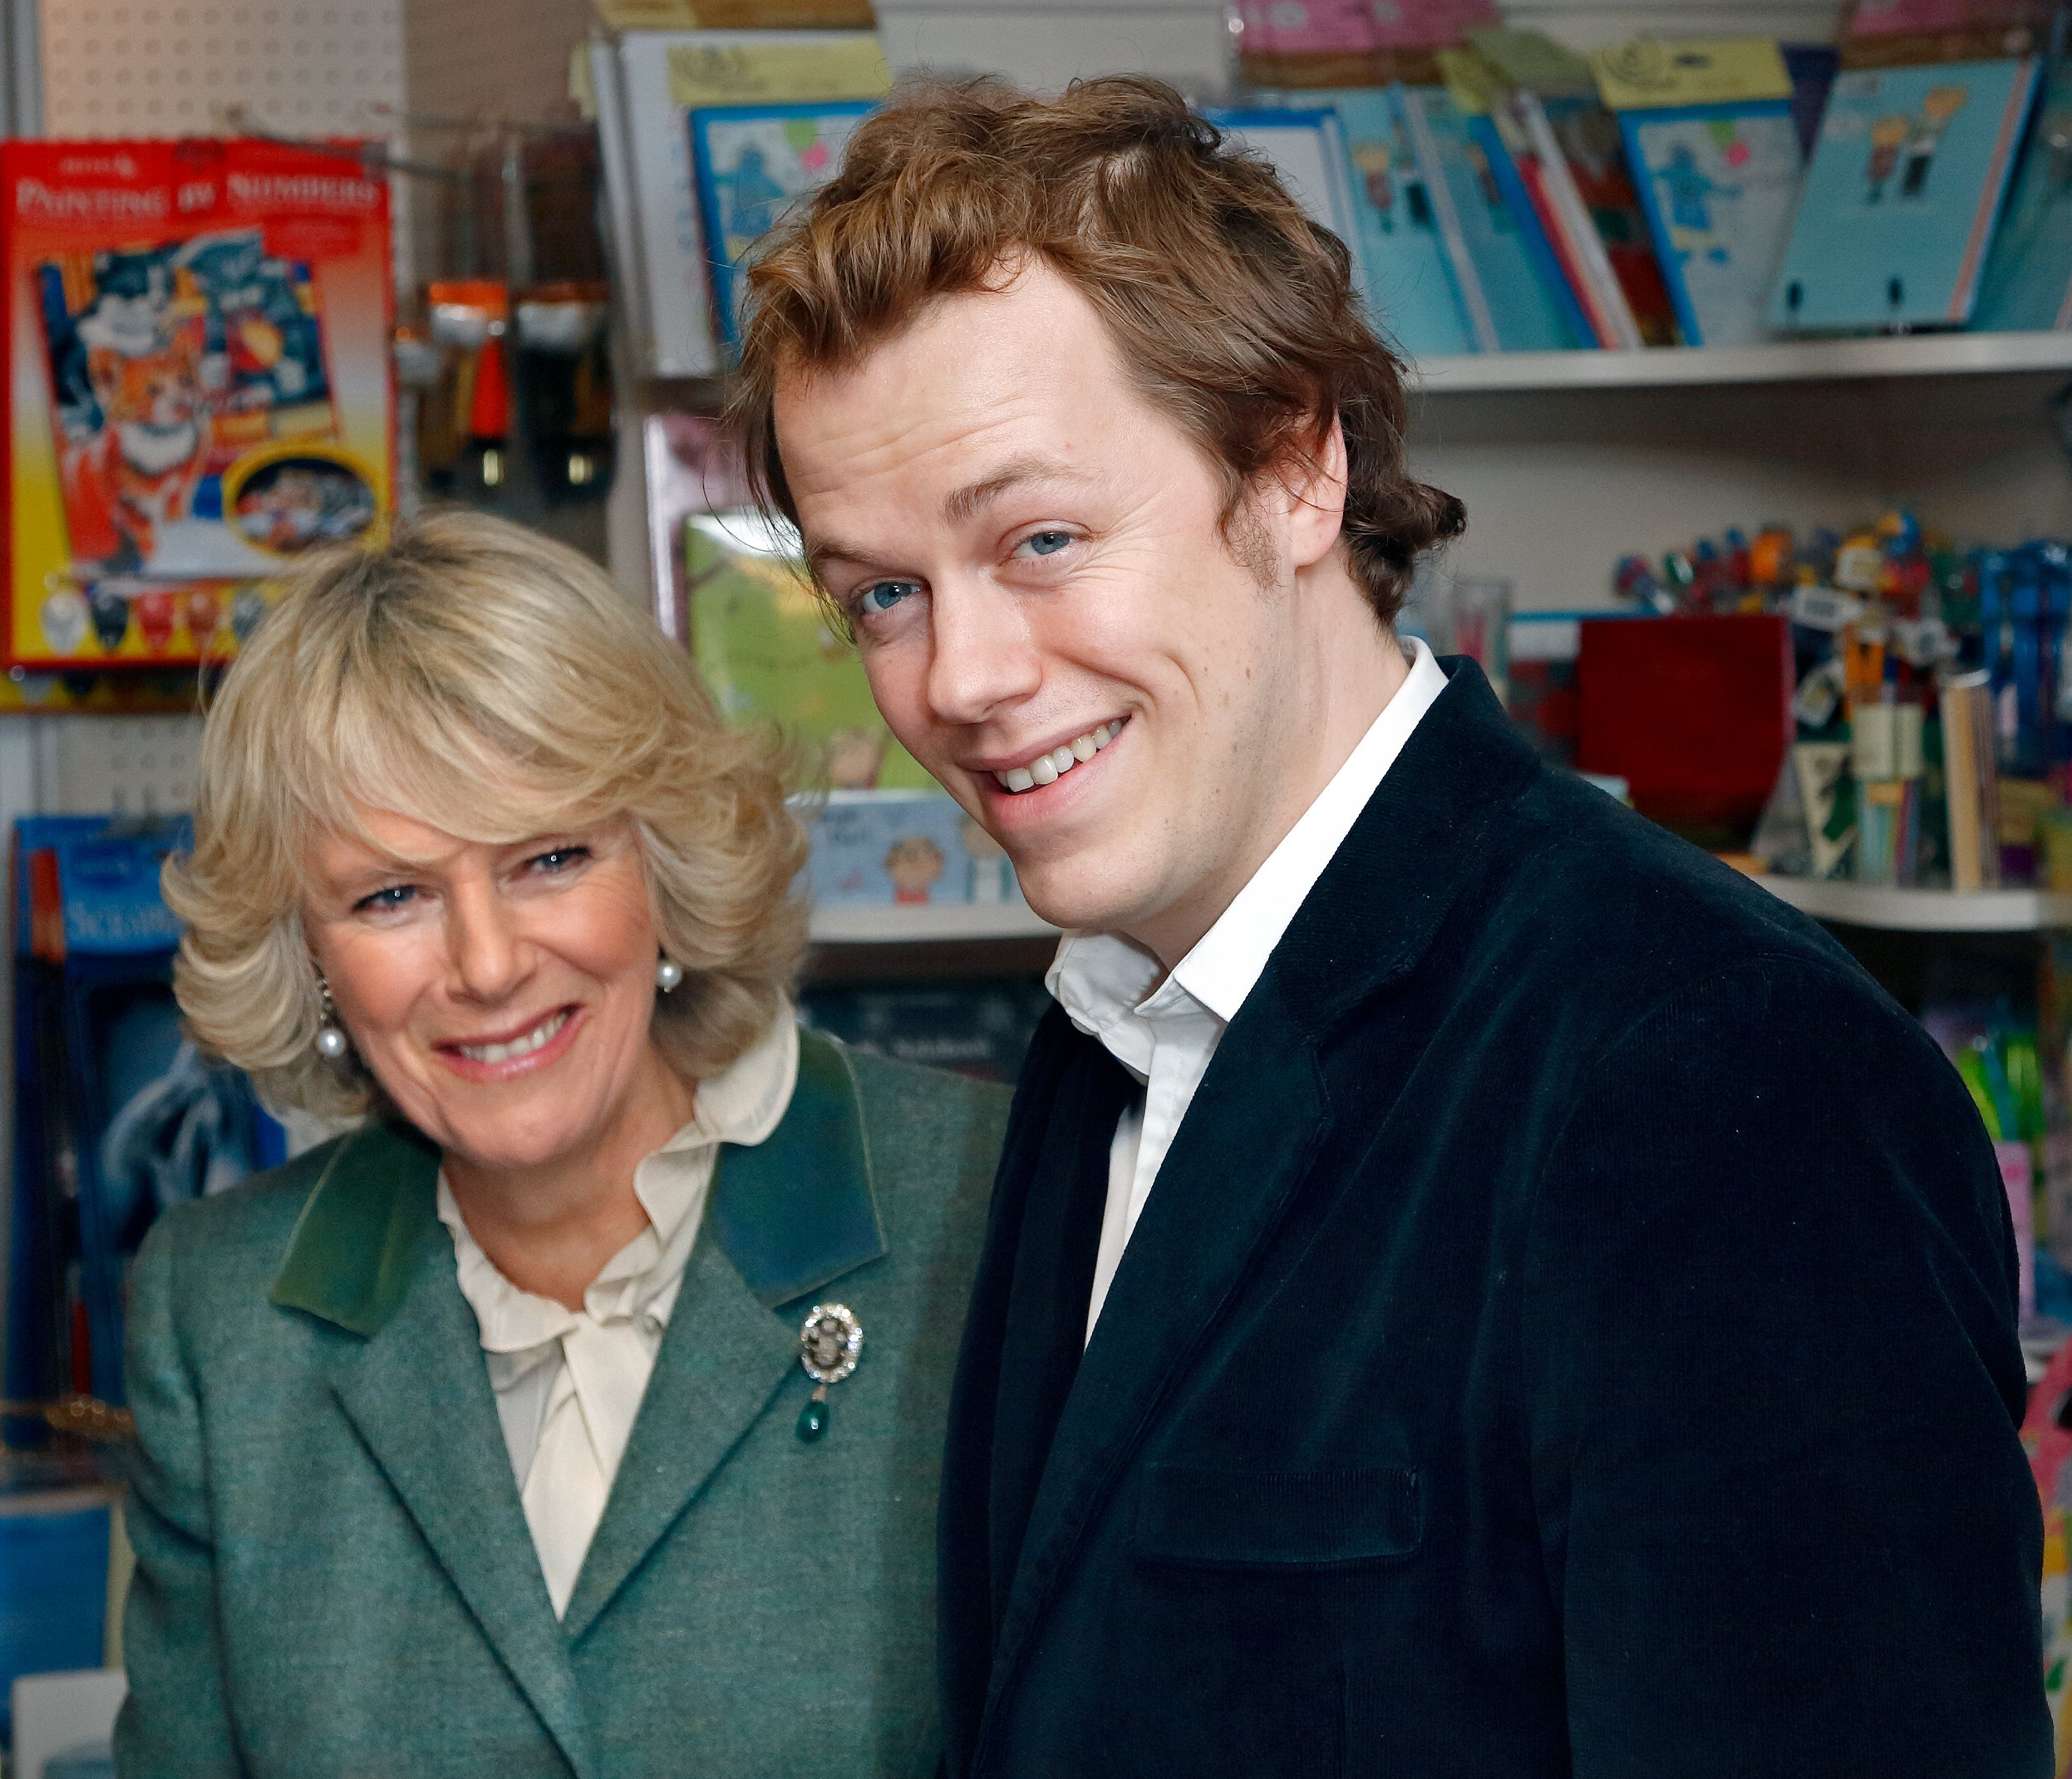 Camilla Parker-Bowles and her son, Tom Parker-Bowles in London on November 2006 |  Photo: Getty Images